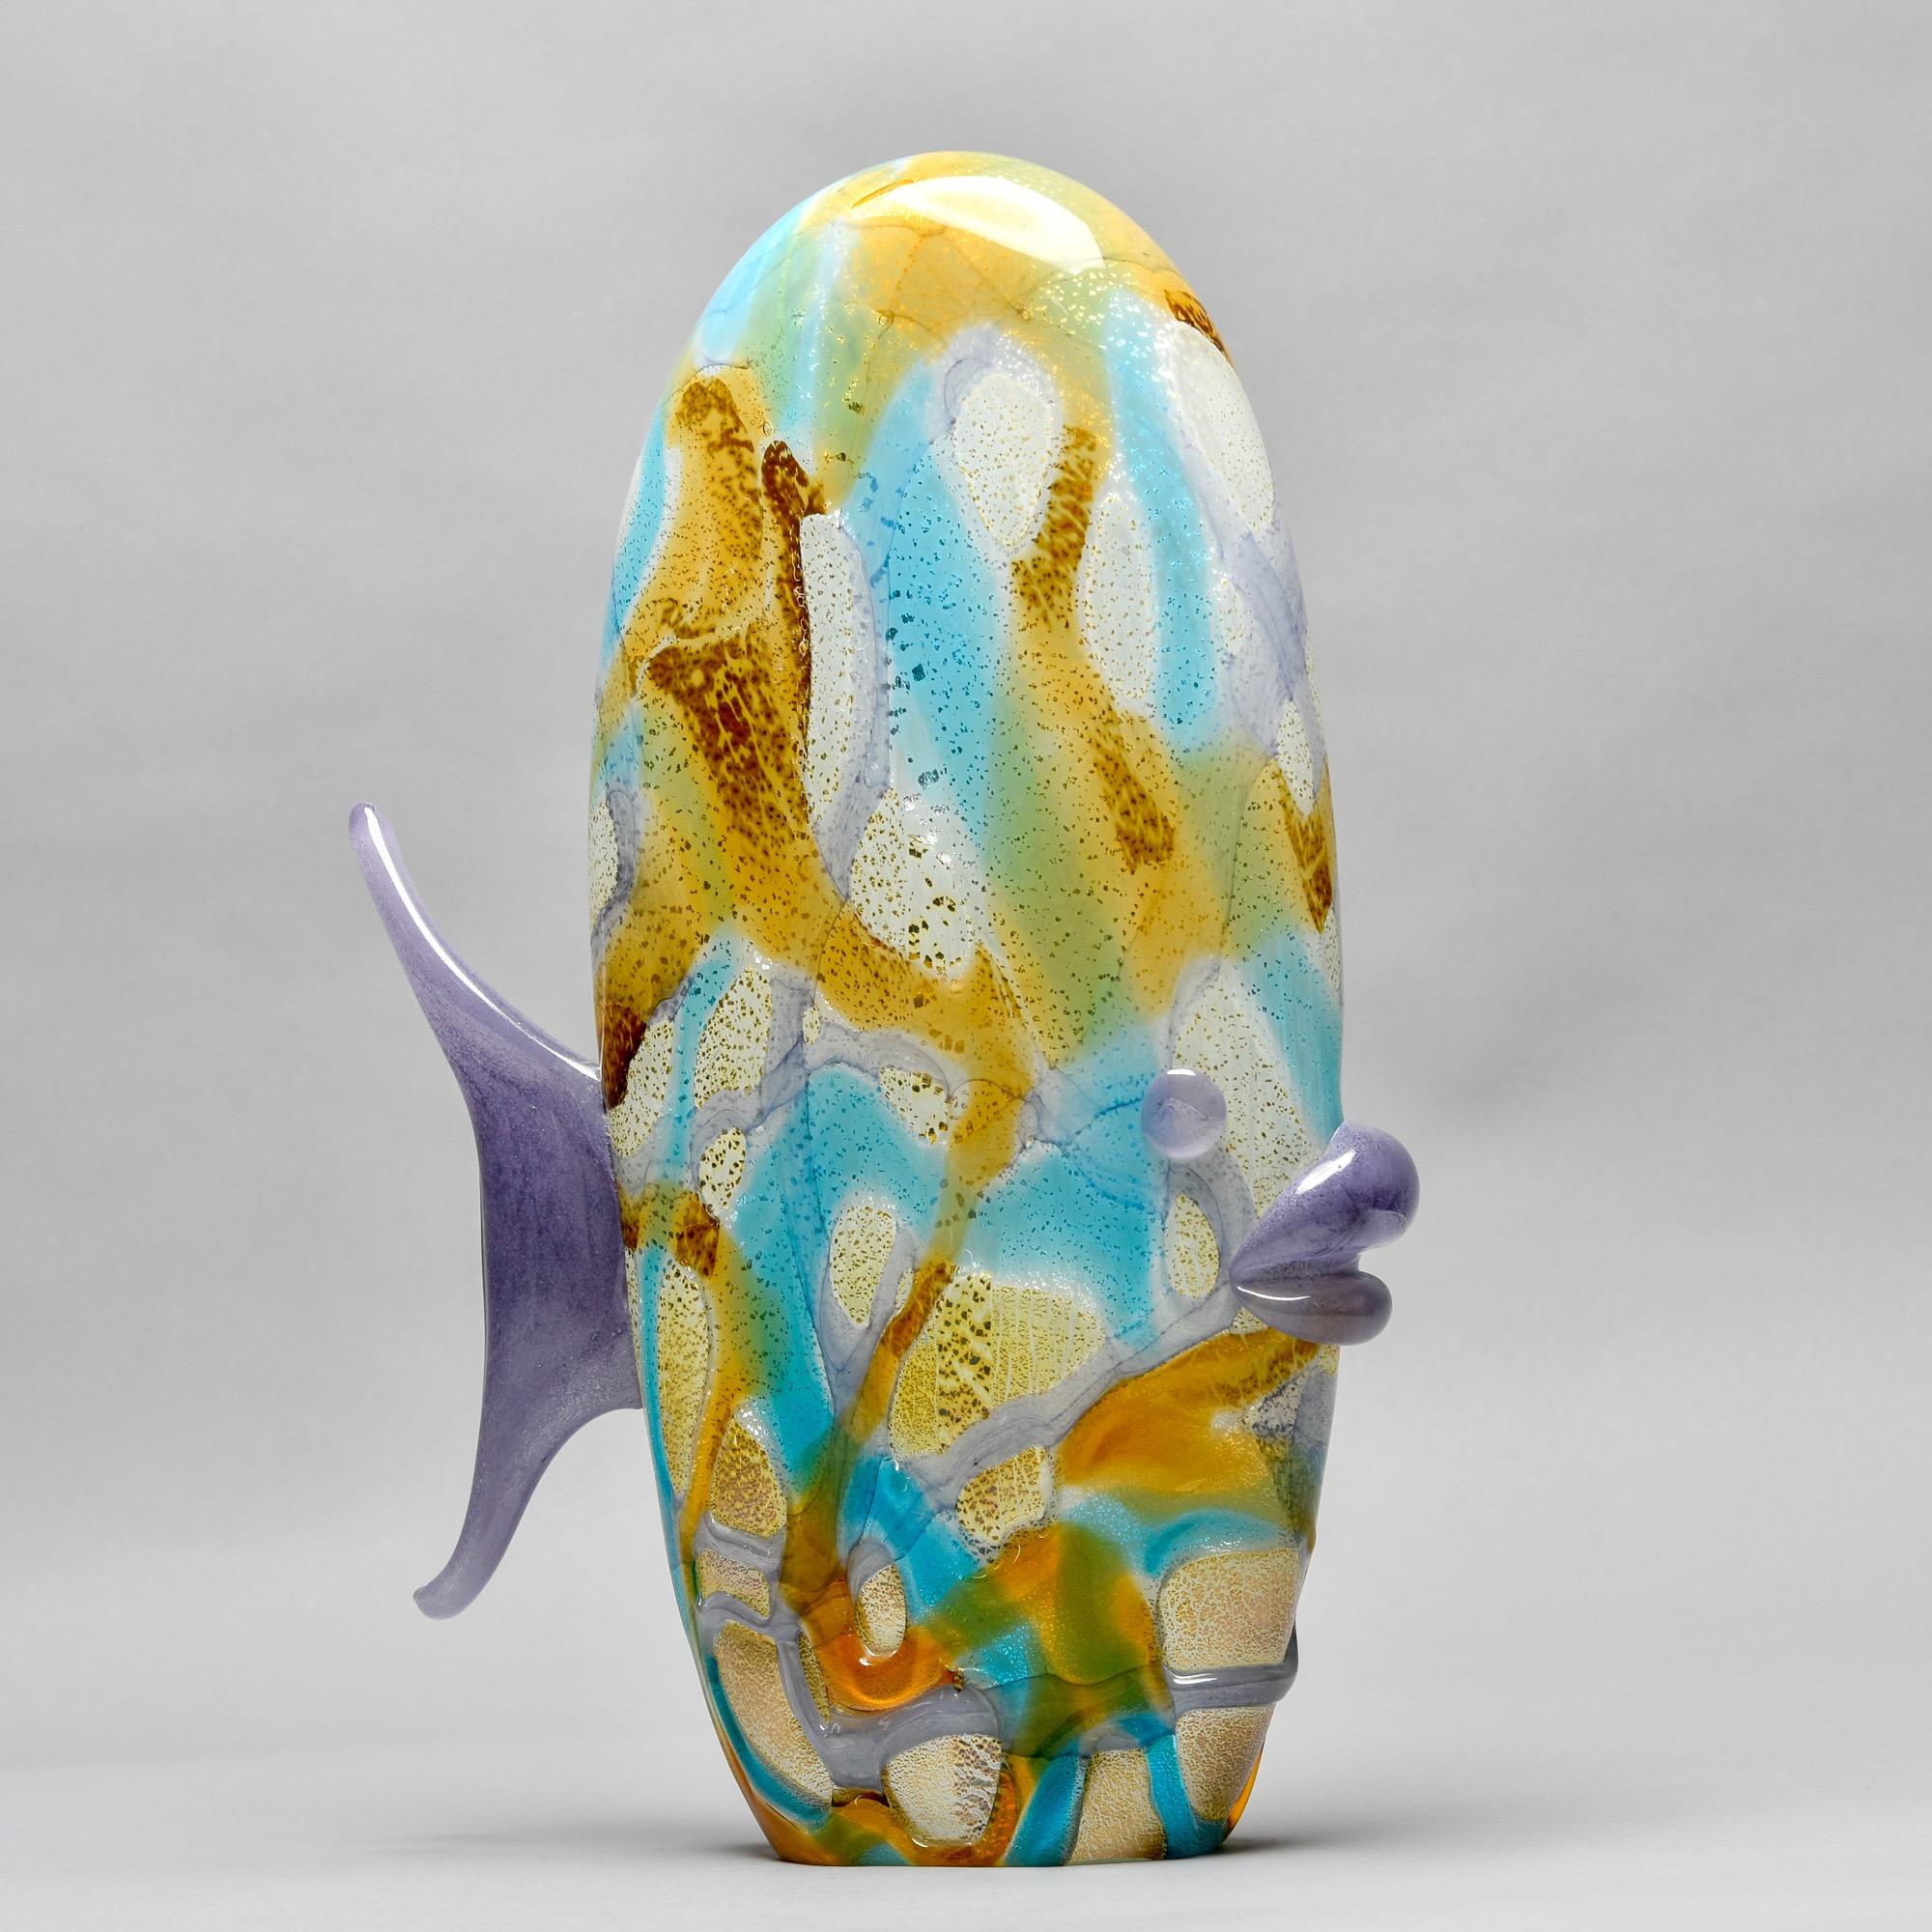 Circa 1980s Murano glass fish is over 14” tall. Glass is streaked with amber and blue tones and has applied lilac glass tail, mouth and eyes. Unknown Murano maker. No flaws or repairs found.